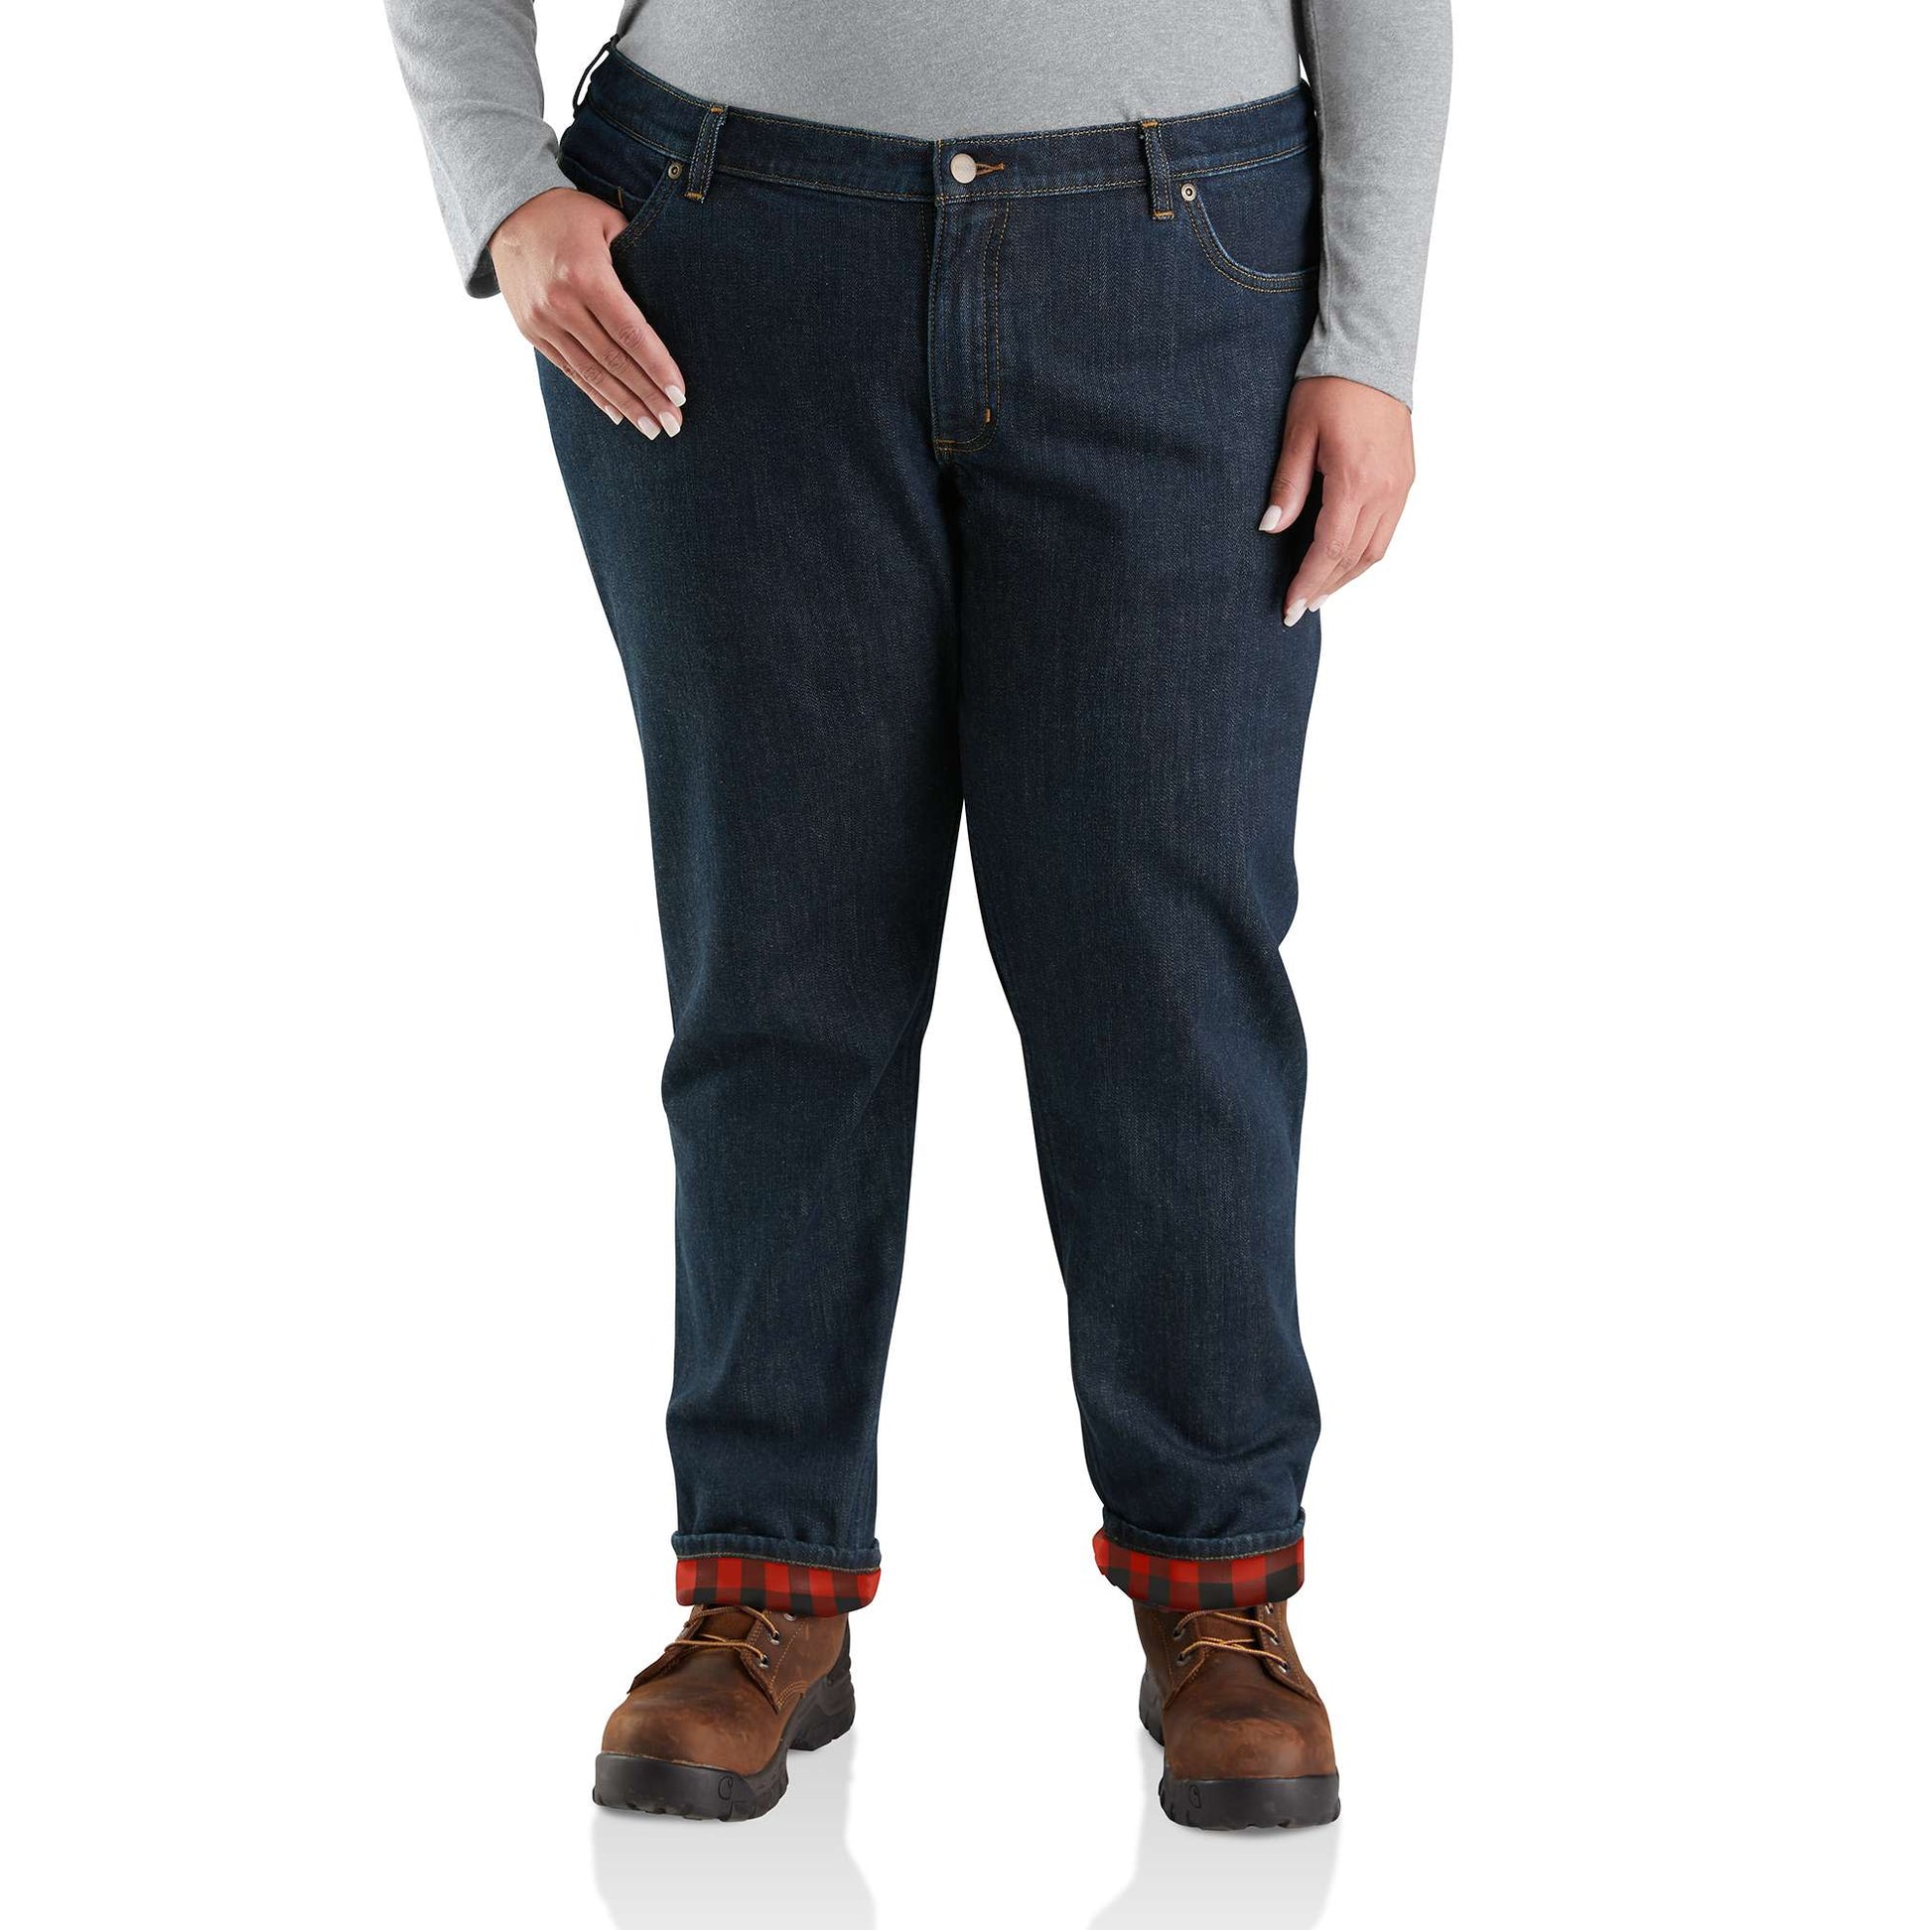 HugeDomains.com  Lined jeans, Flannel lined jeans, Flannel women